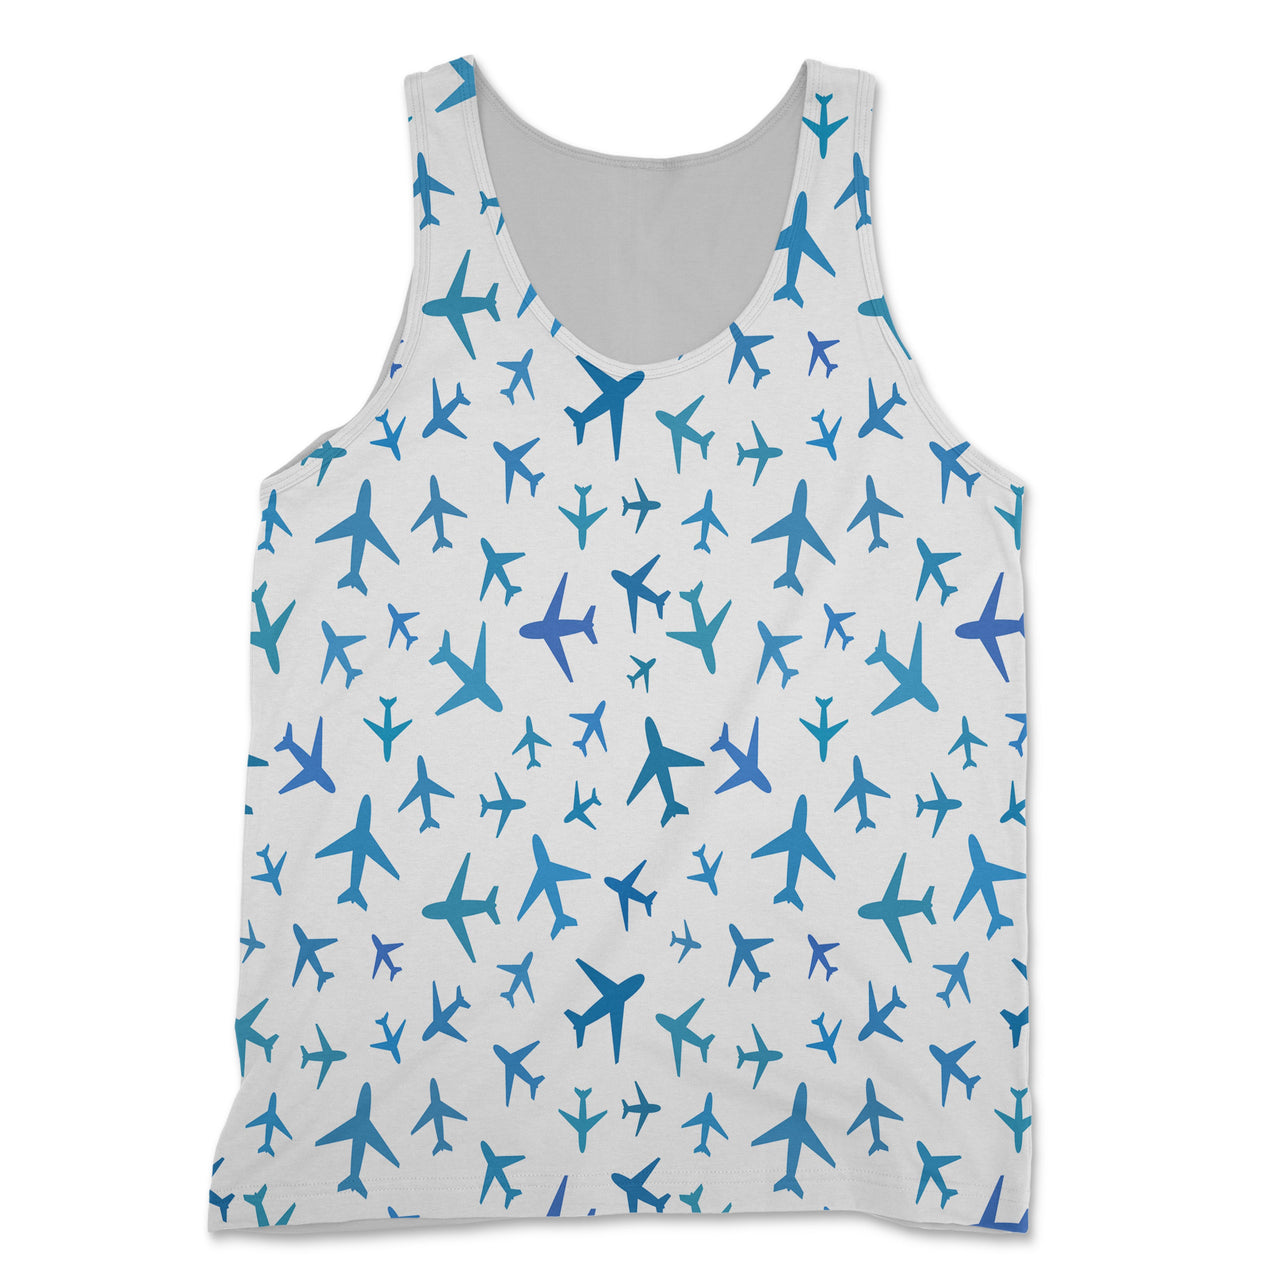 Many Airplanes (White) Designed 3D Tank Tops